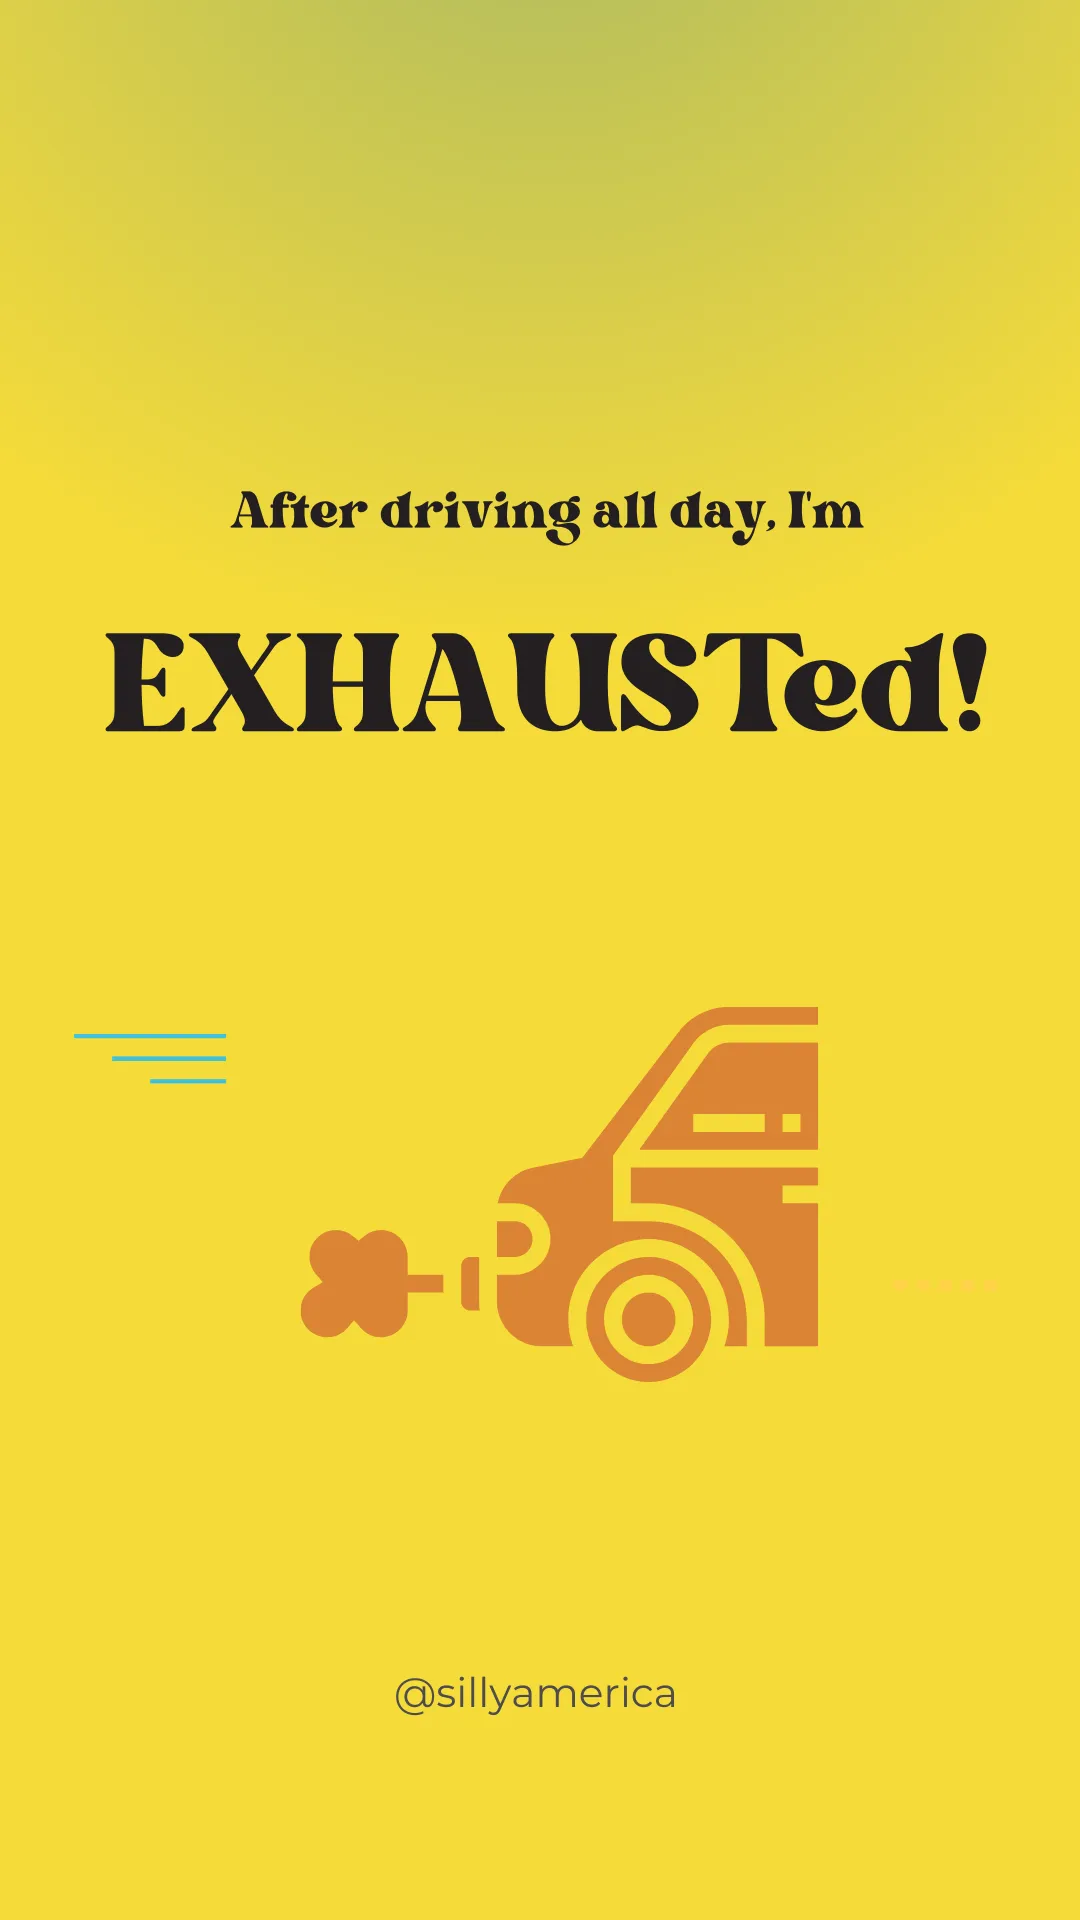 After driving all day, I'm EXHAUSTed! - Road Trip Puns